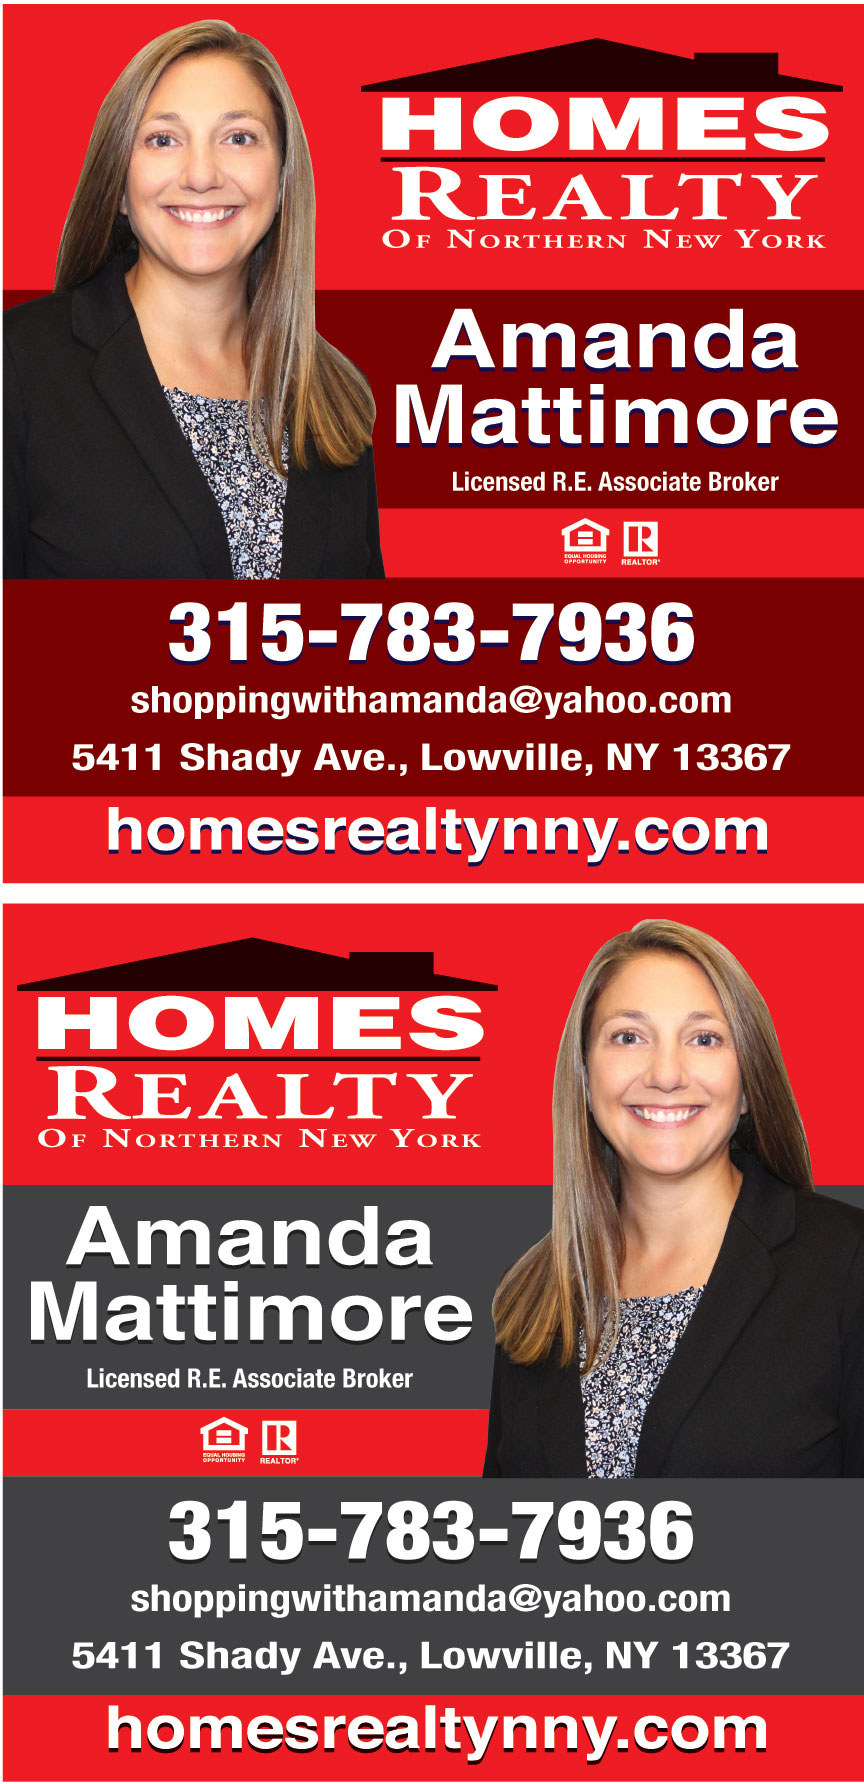 HOMES REALTY OF NORTHERN